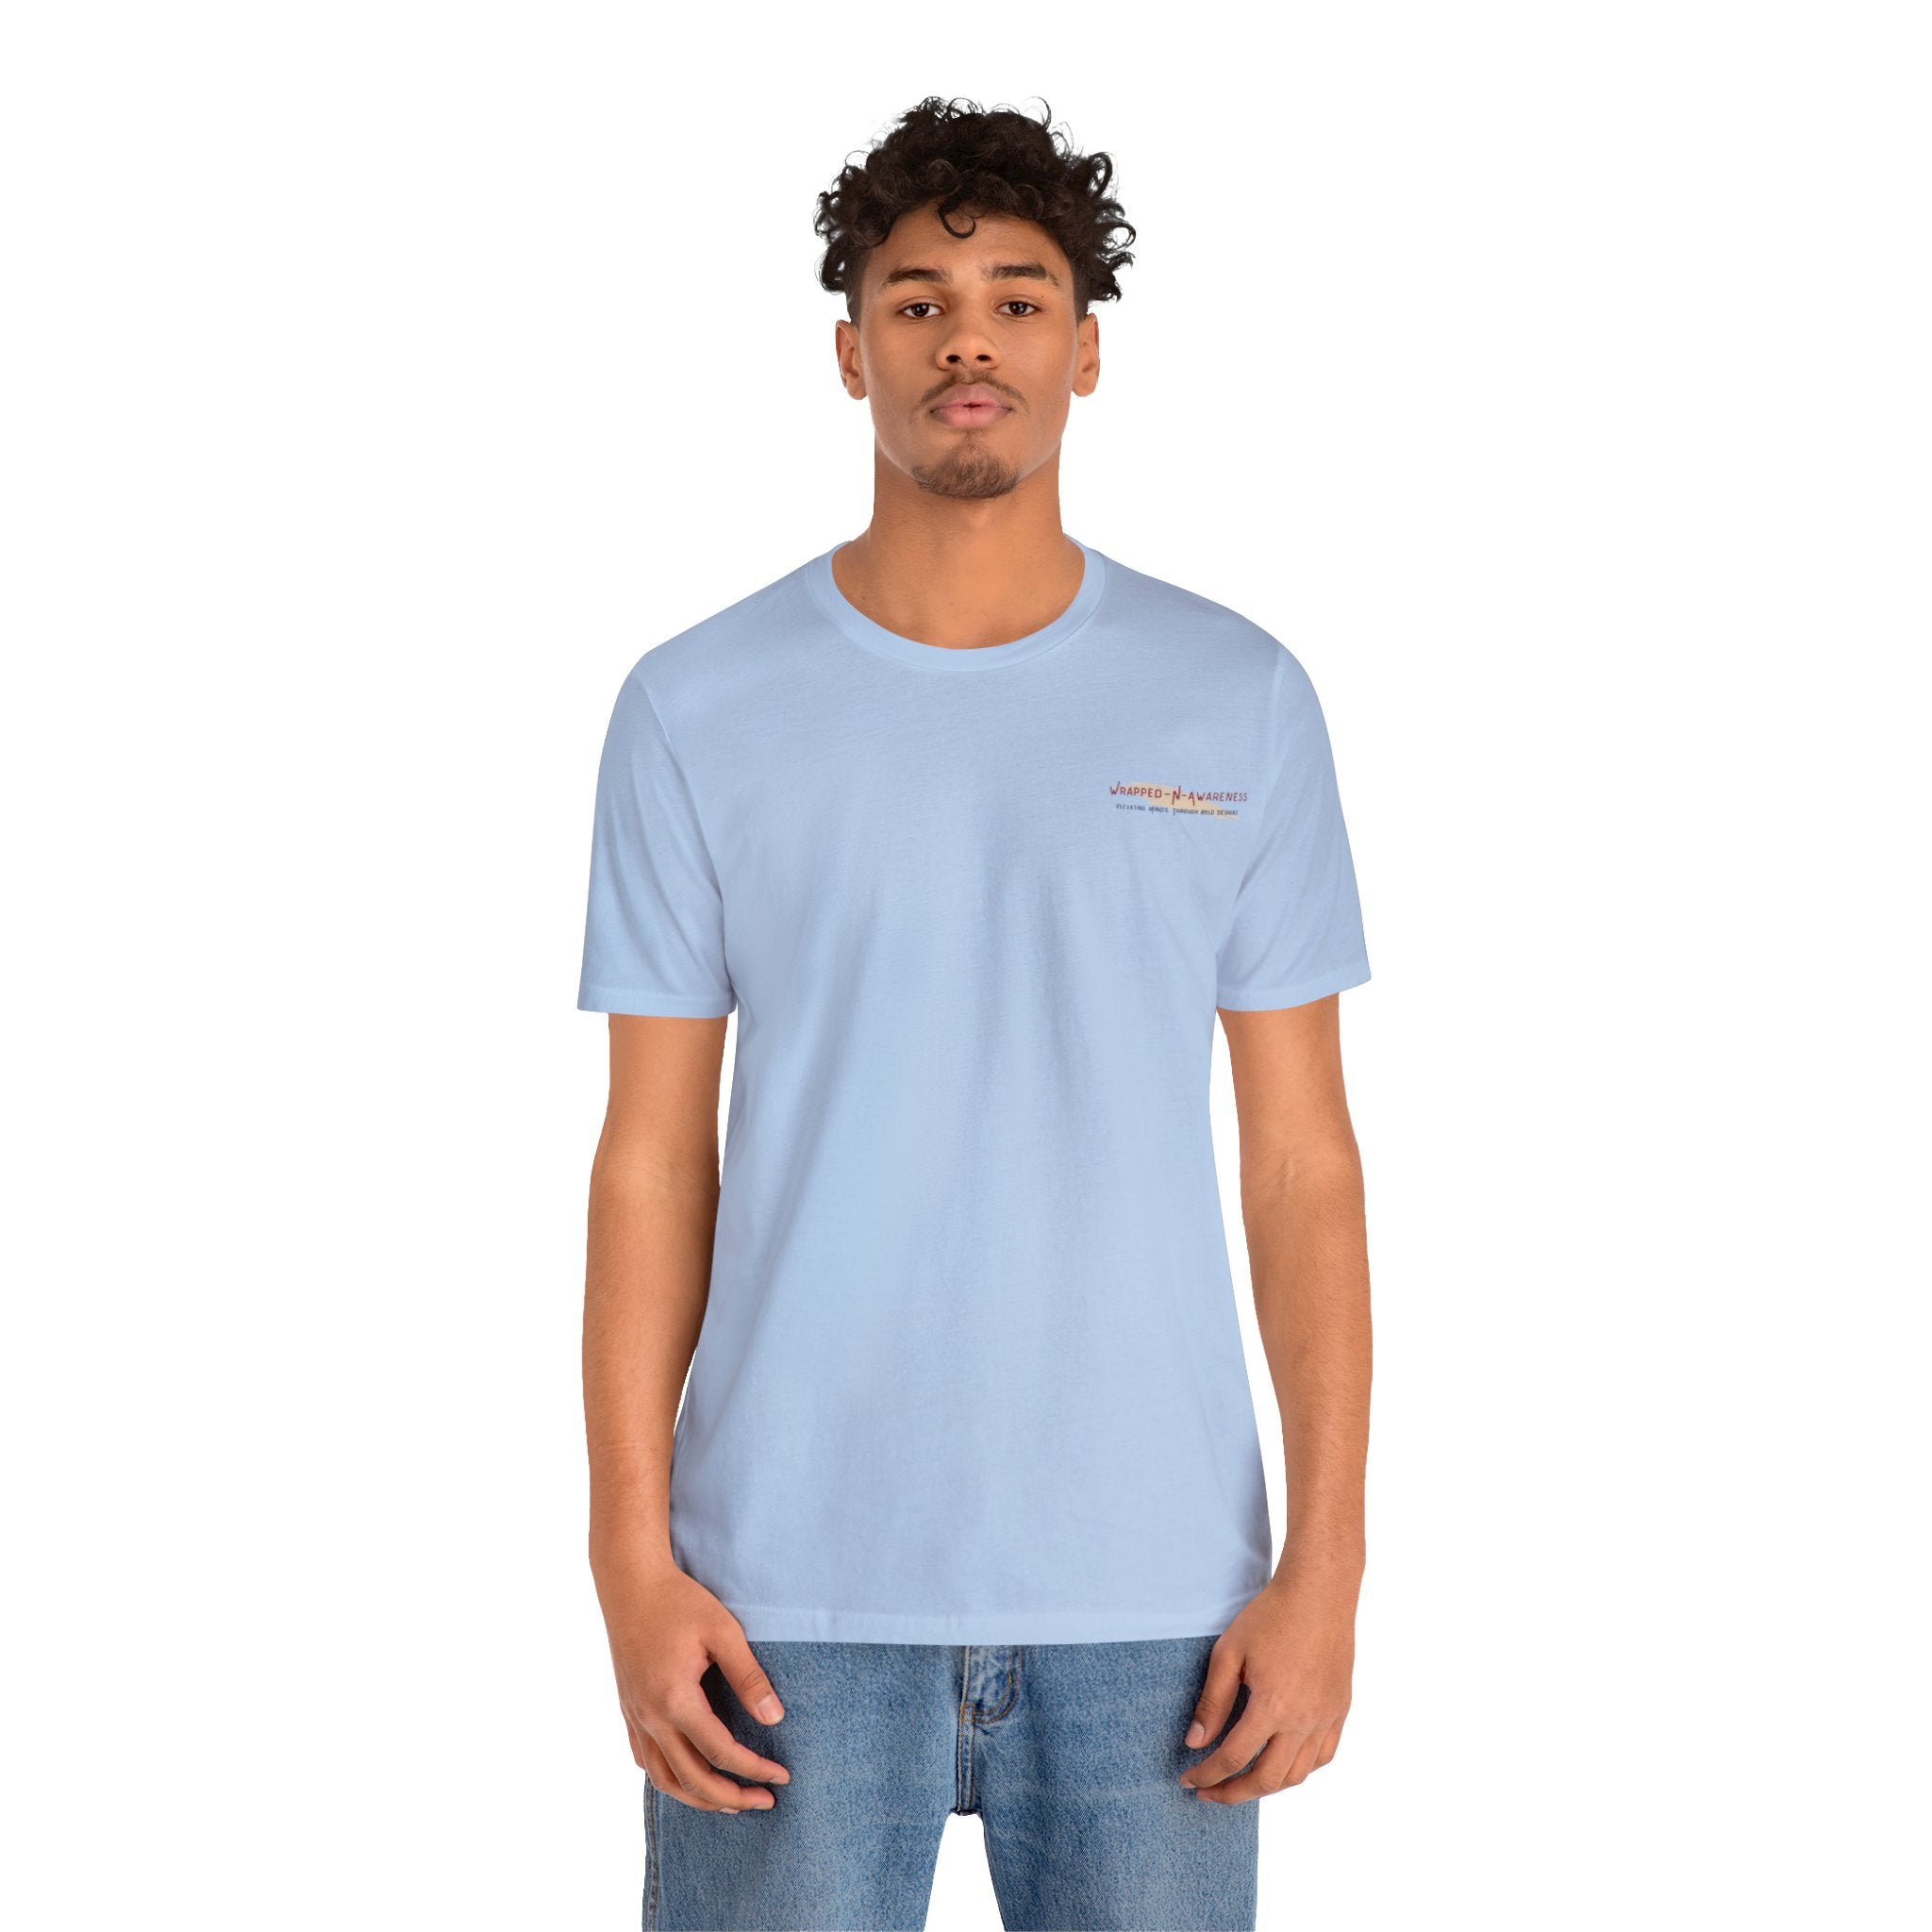 Hope Conquers Fear Jersey Tee - Bella+Canvas 3001 Heather Ice Blue Airlume Cotton Bella+Canvas 3001 Crew Neckline Jersey Short Sleeve Lightweight Fabric Mental Health Support Retail Fit Tear-away Label Tee Unisex Tee T-Shirt 5738085085158903393_2048 Printify